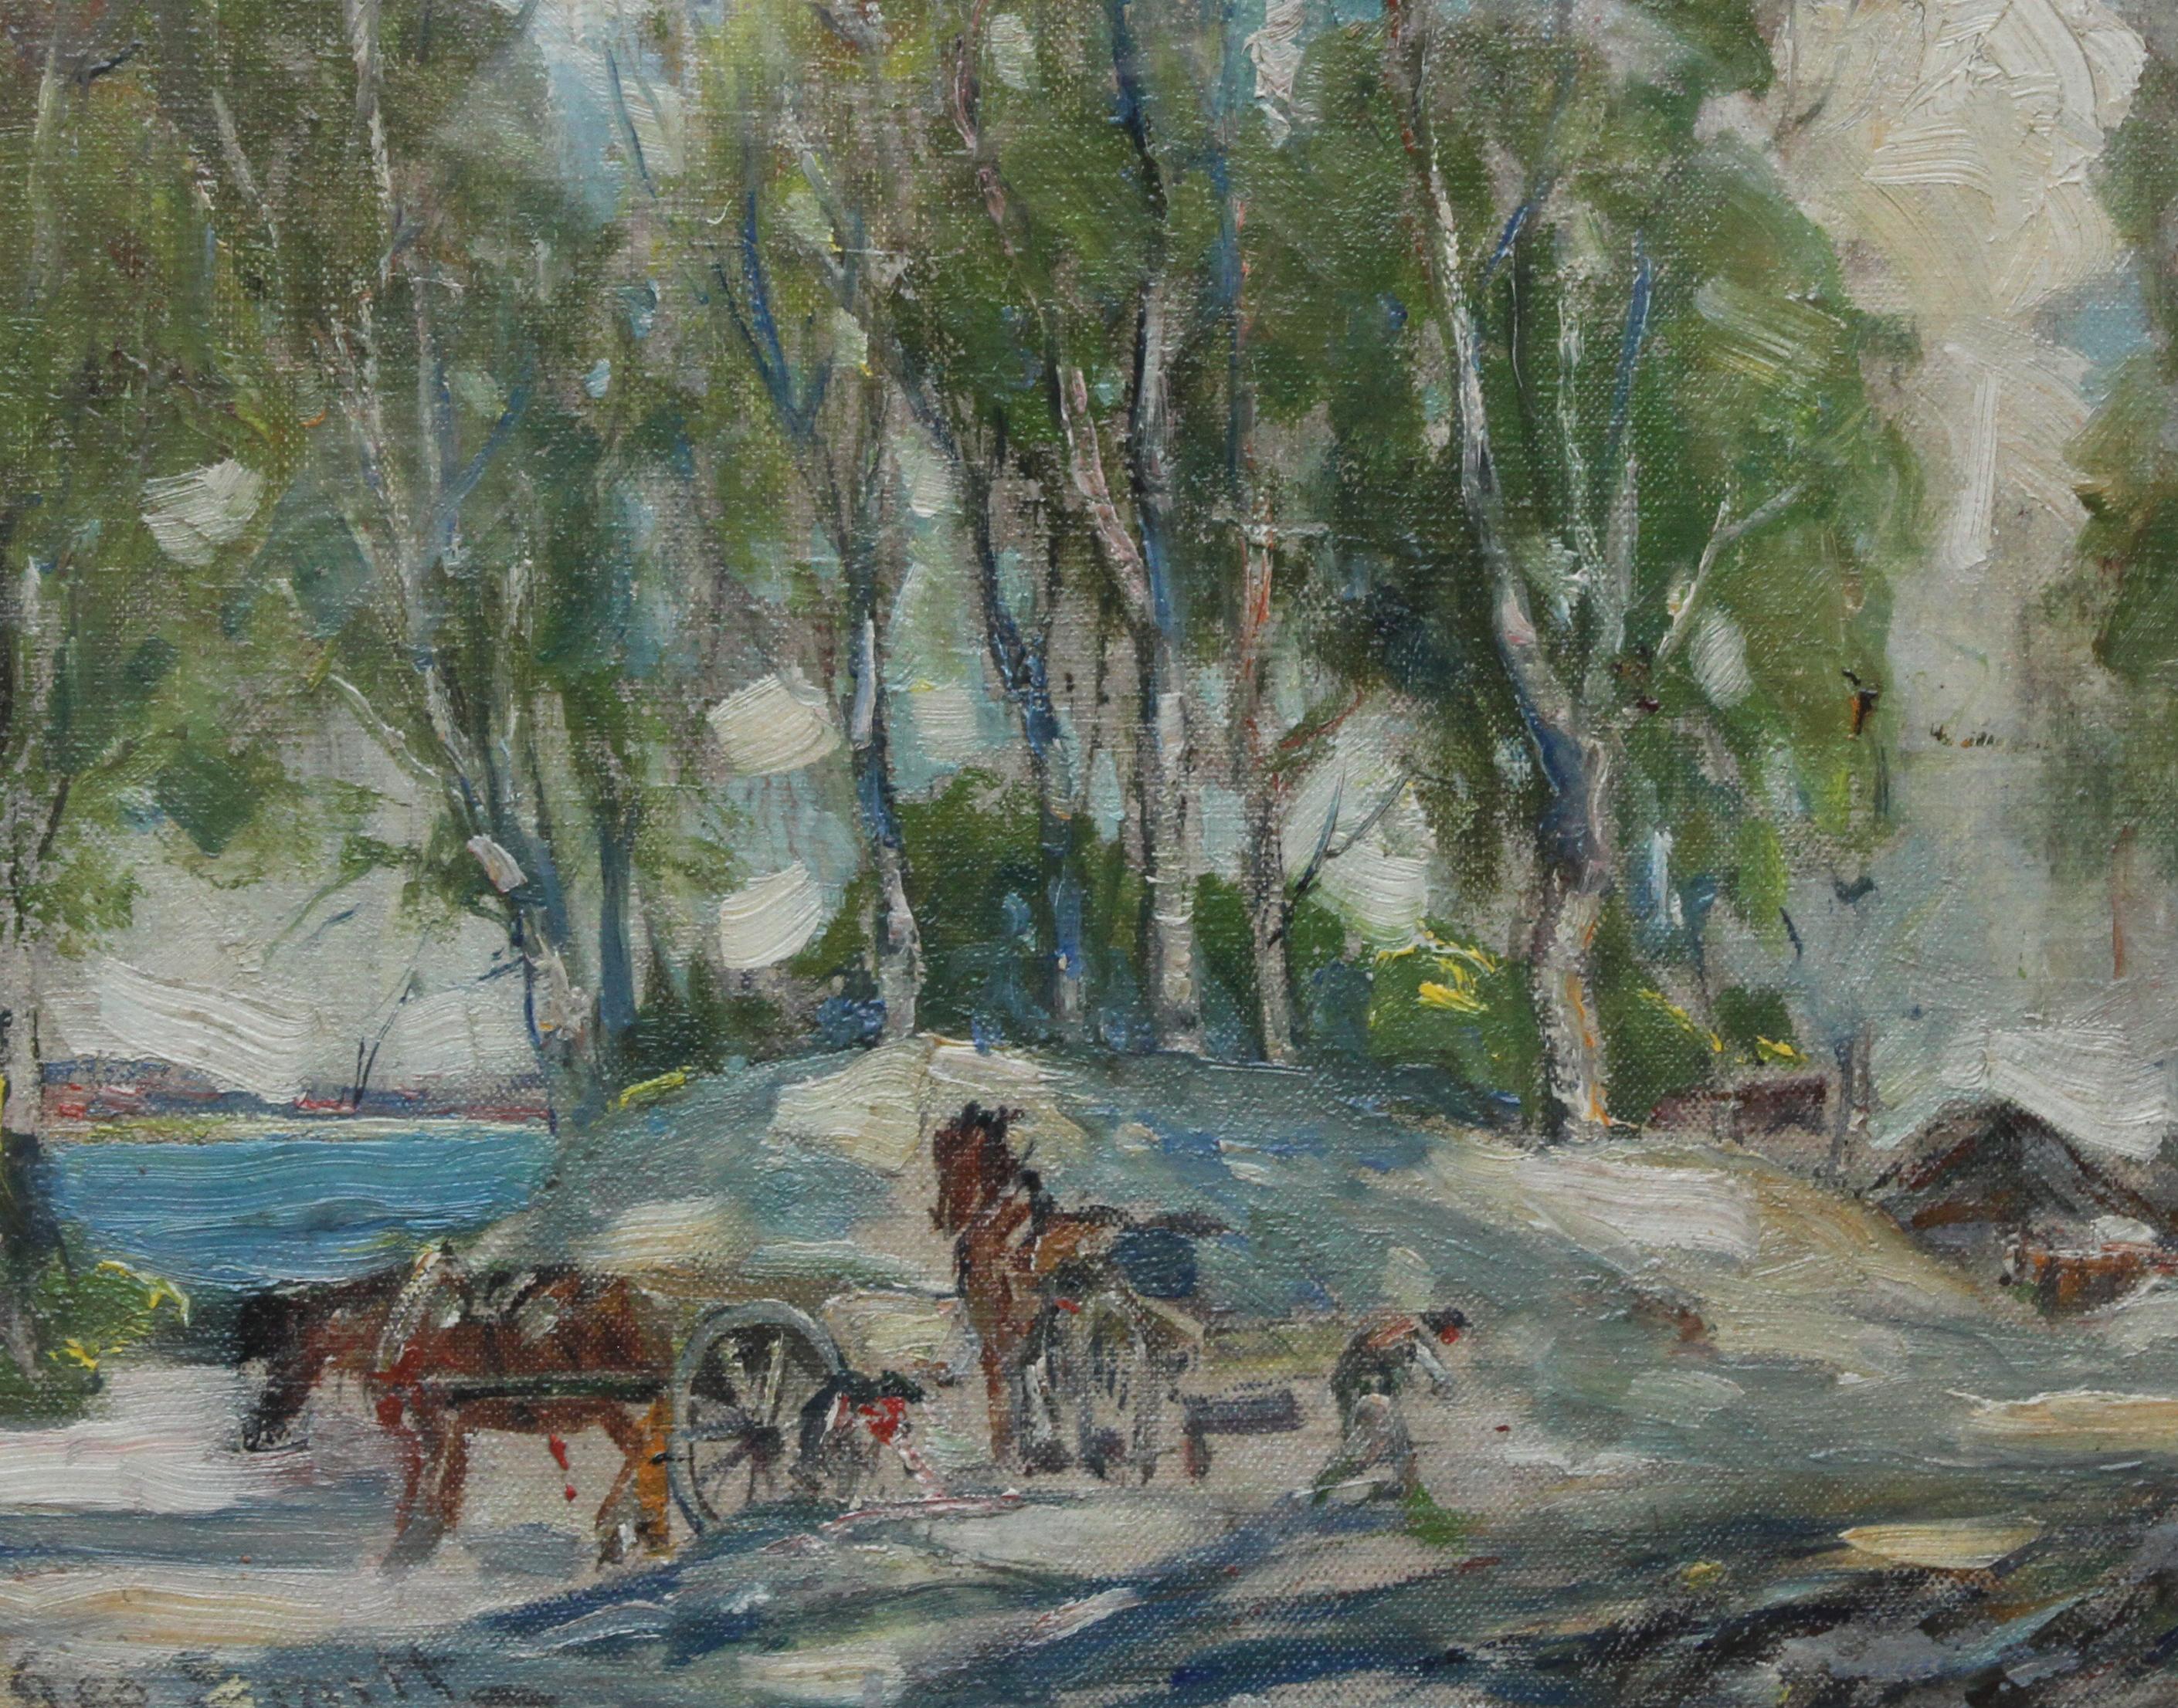 This lovely Impressionist Colourist oil painting is a fine example of the work of noted Scottish landscape and animal artist George Smith. He was particularly known for his paintings of working horses of which ours has two such horses in the